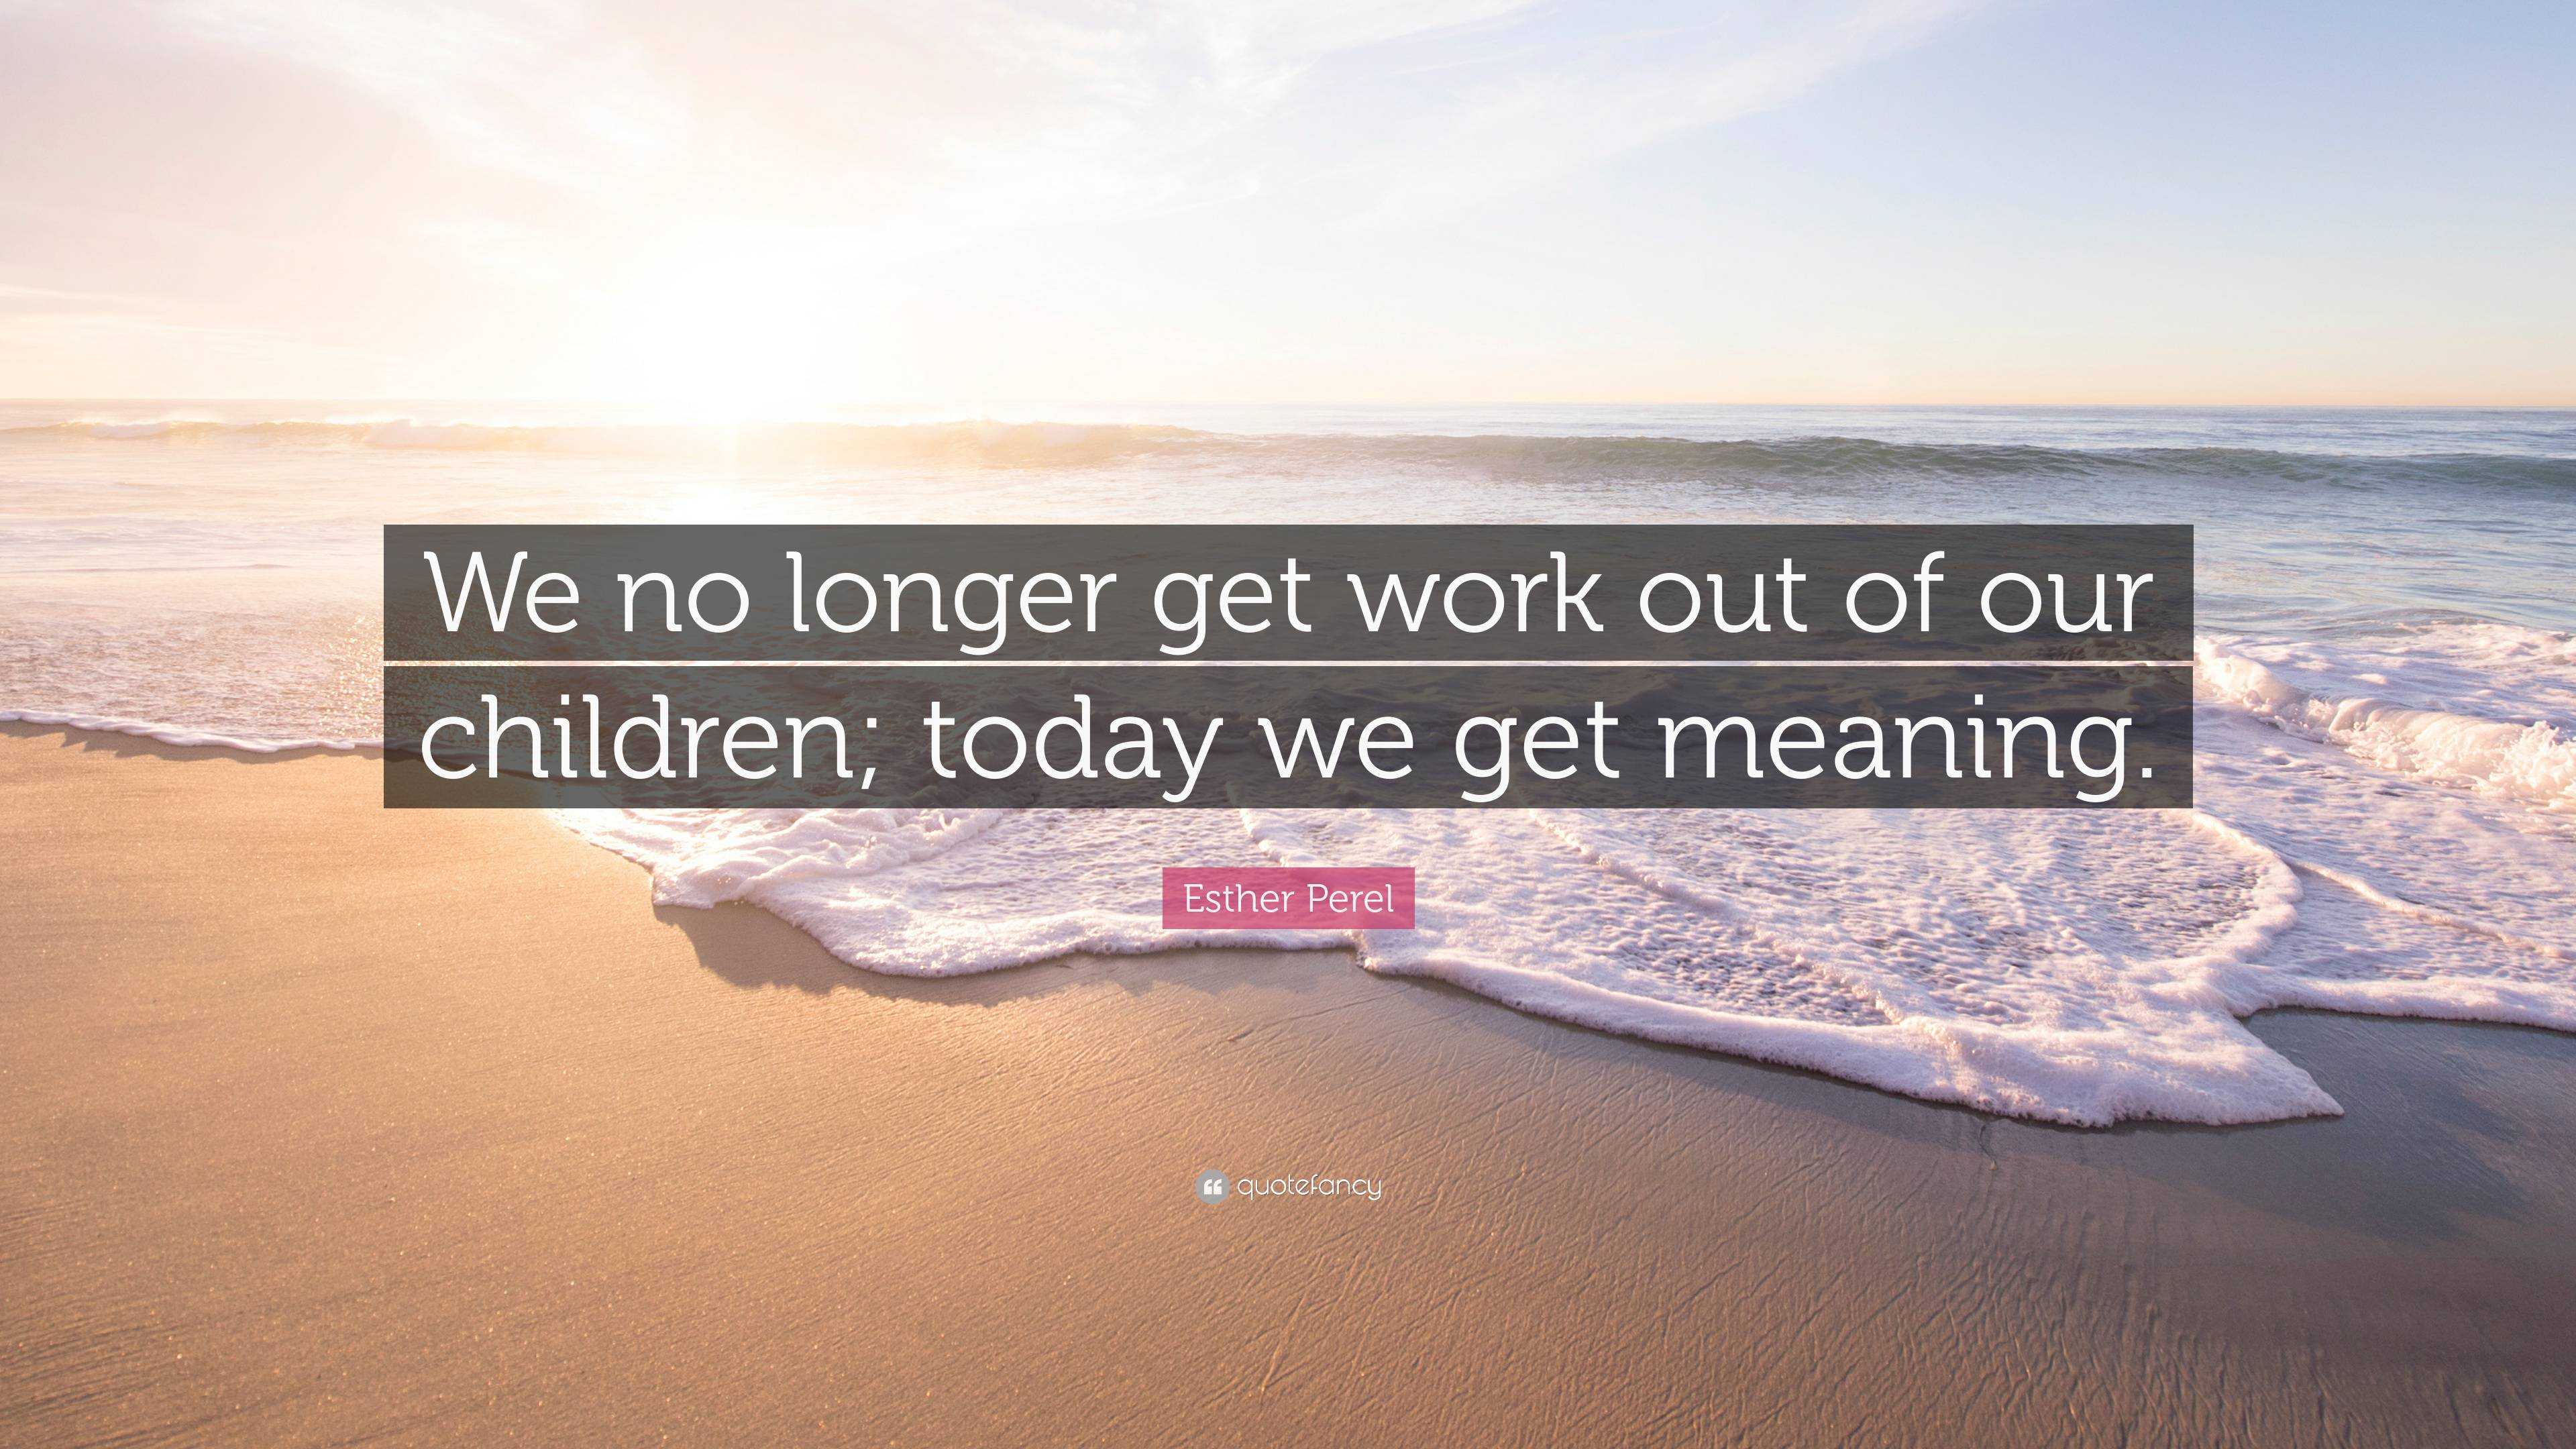 Esther Perel Quote: “We no longer get work out of our children